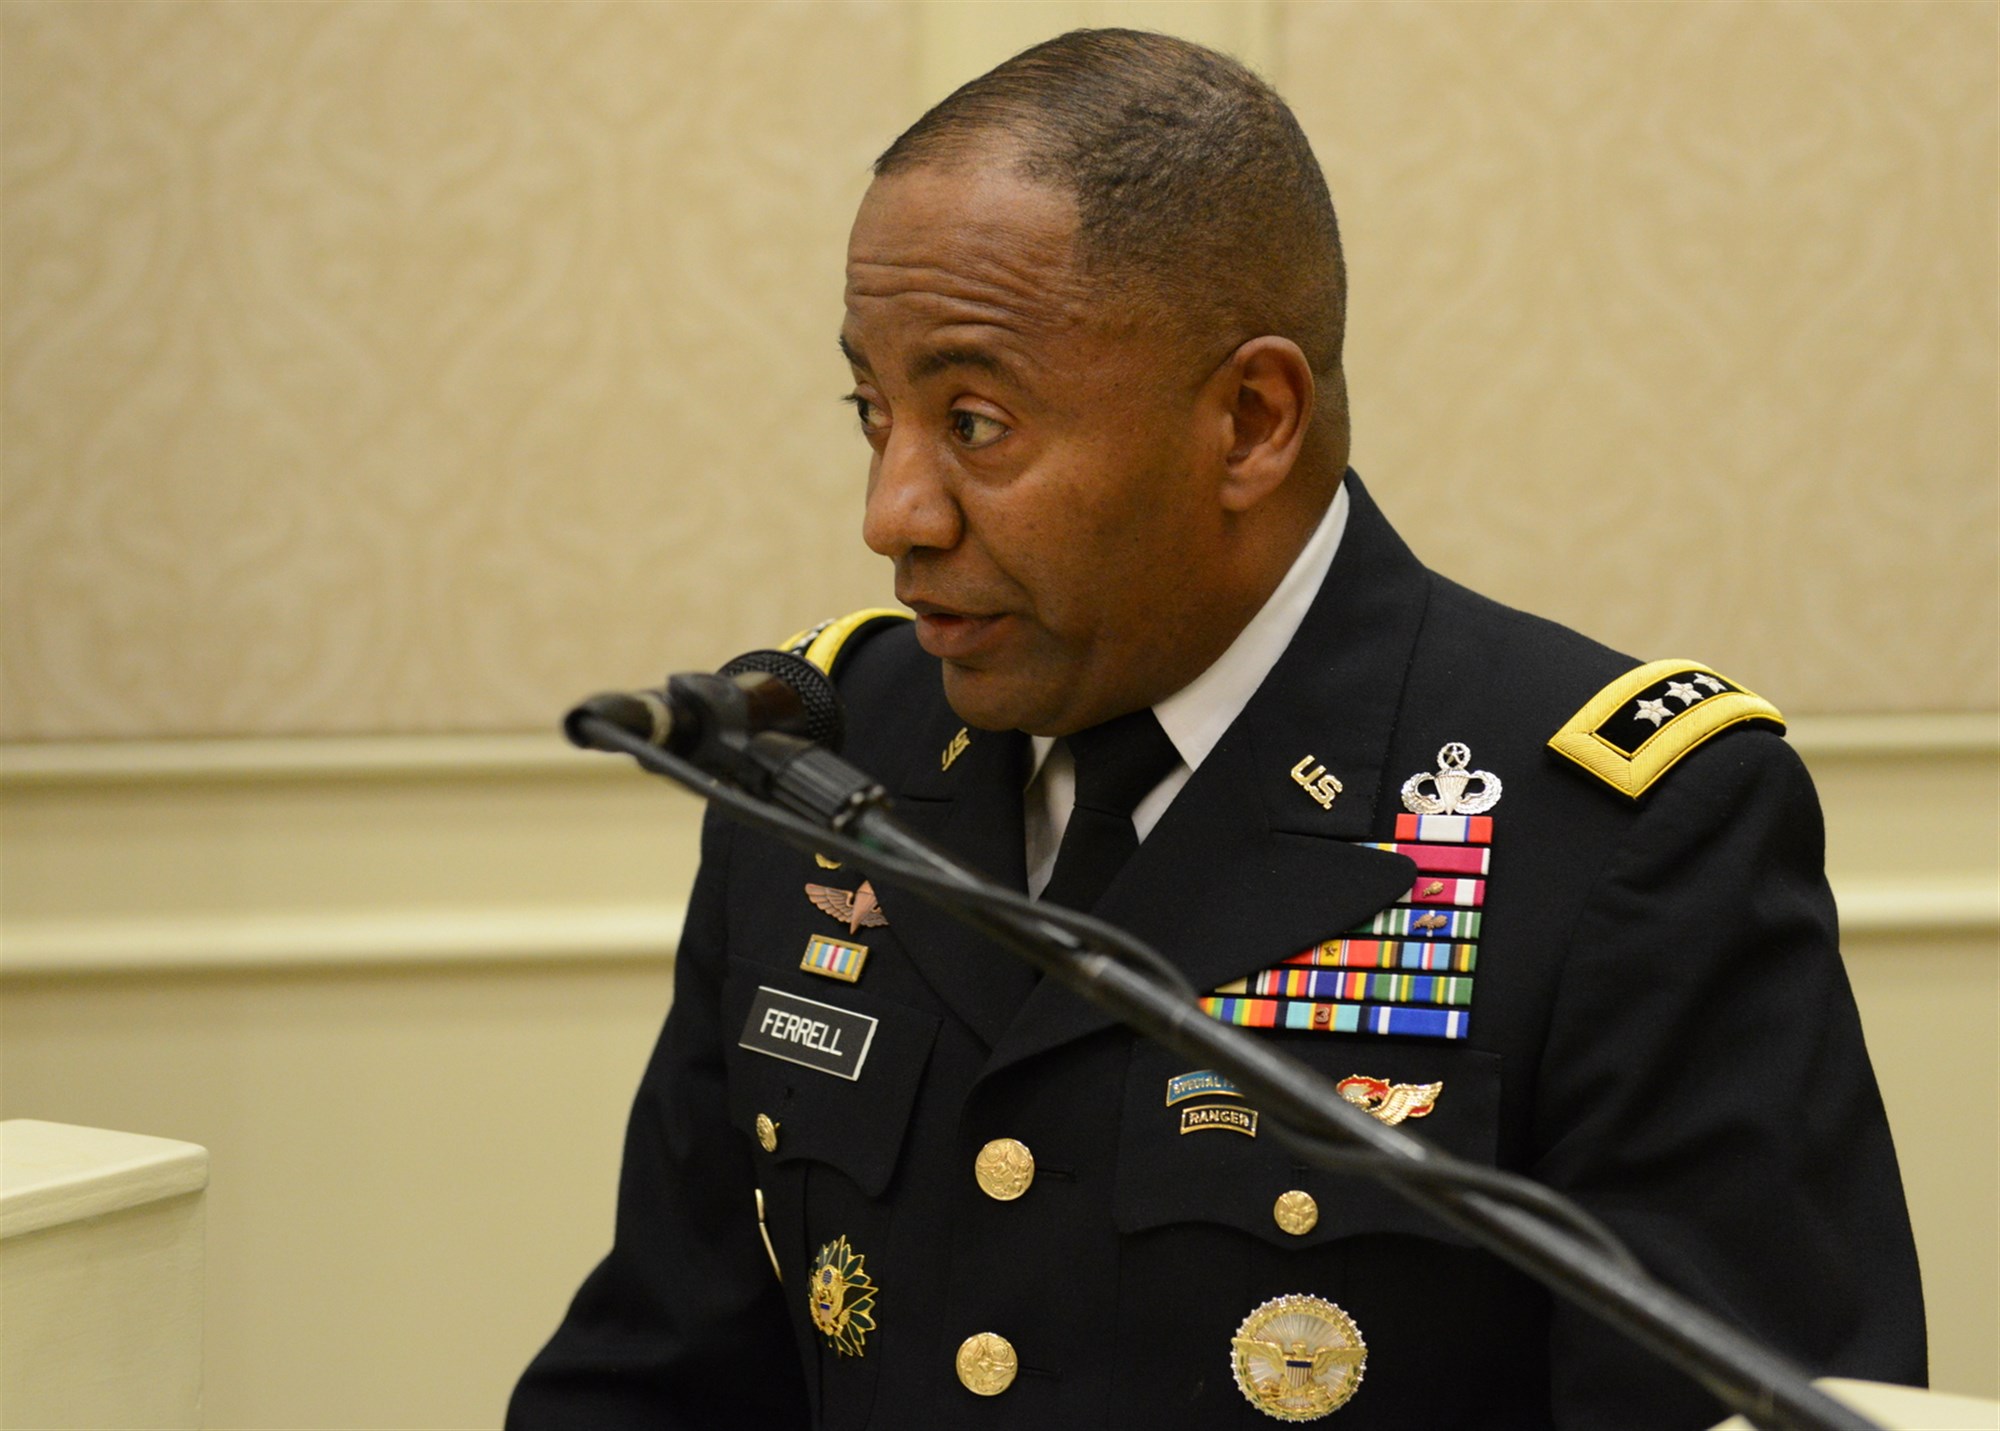 Network Upgrades ‘Take Off At Light Speed’: Army CIO